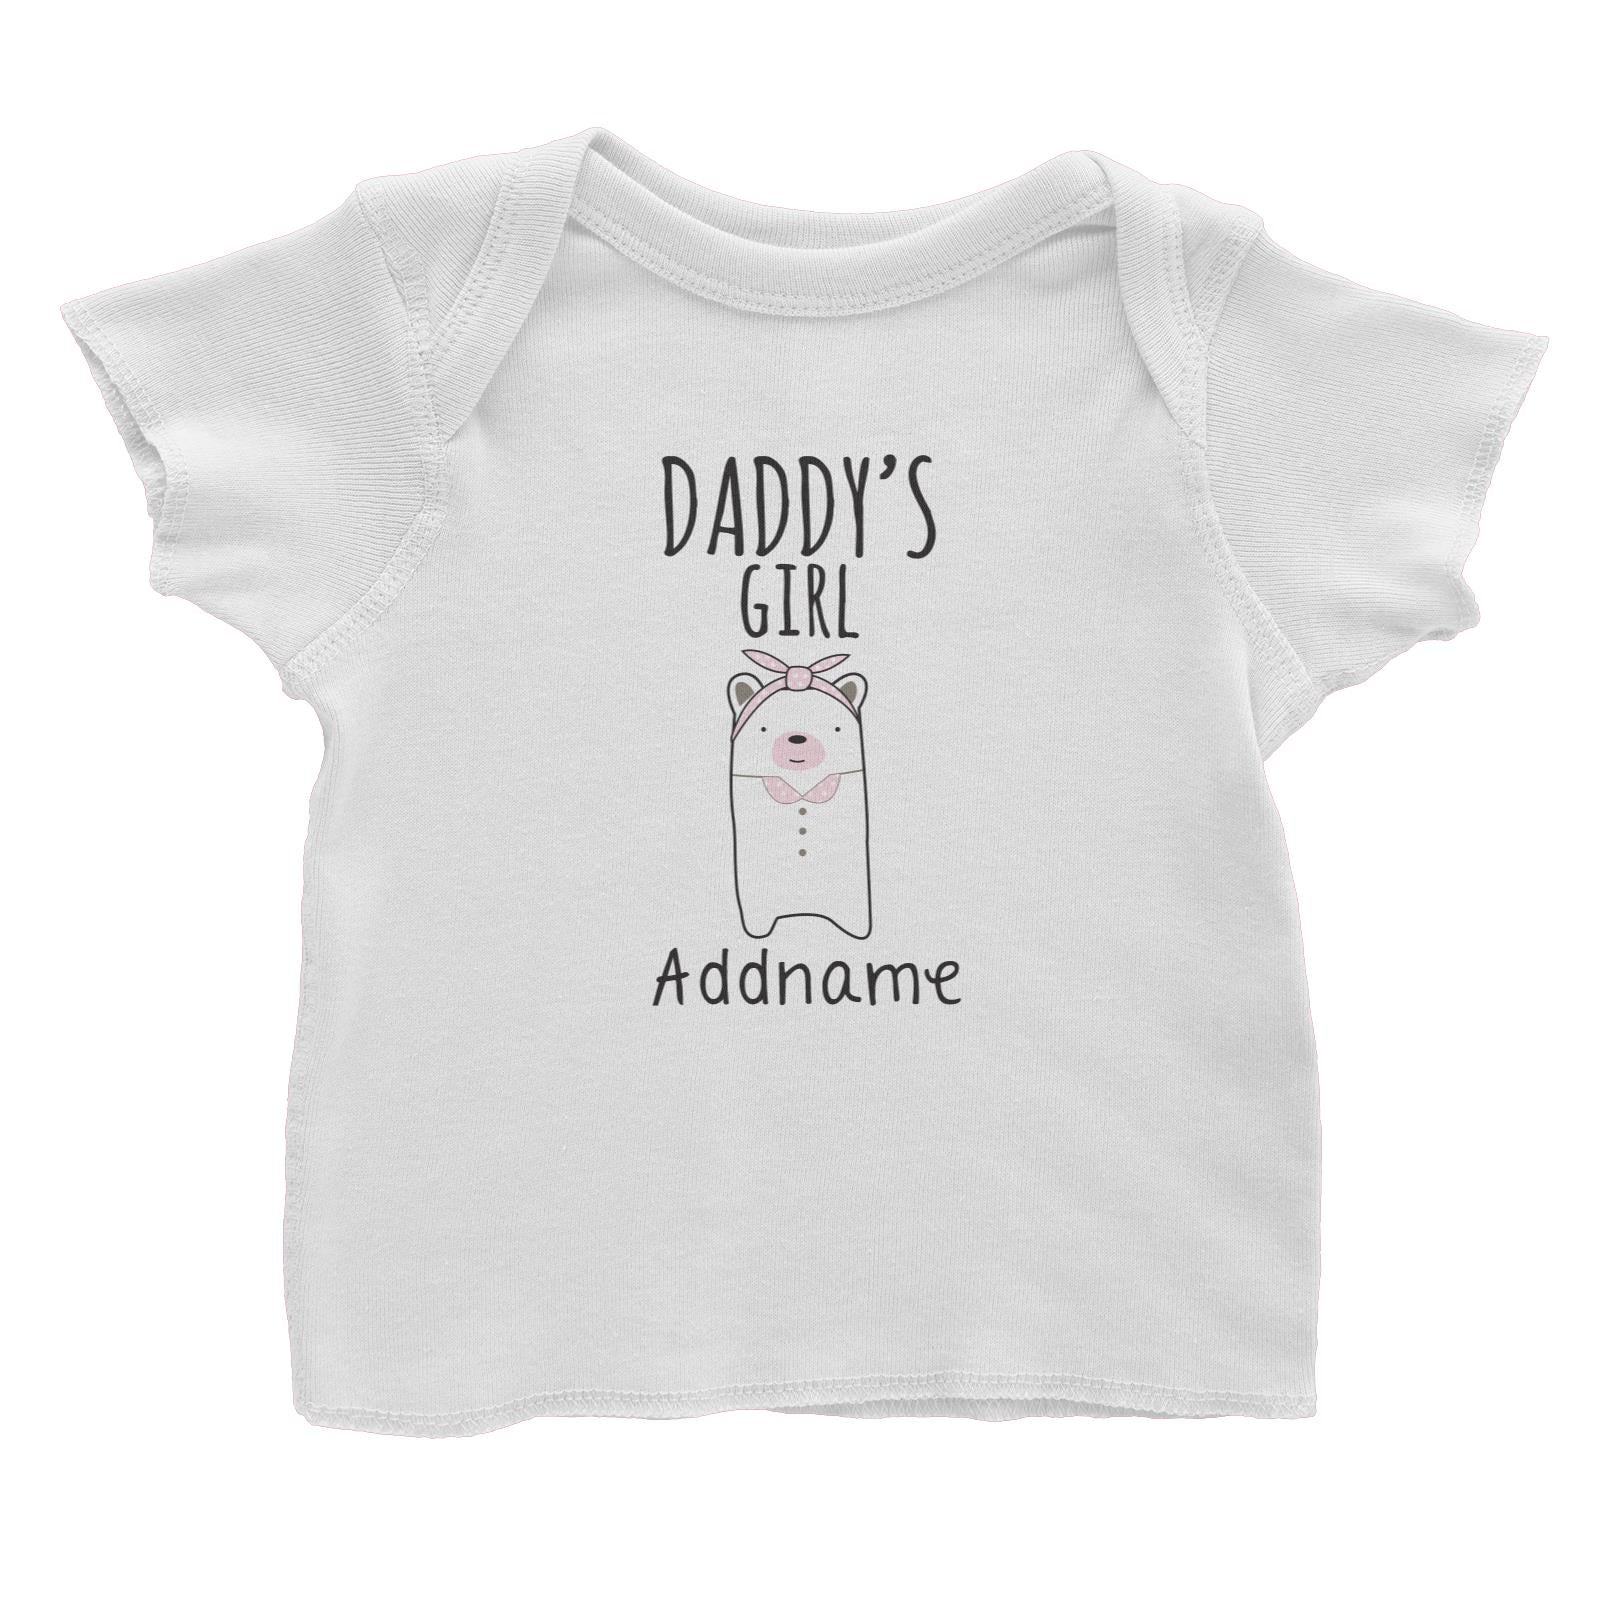 Cute Animals and Friends Series 2 Bear Daddy's Girl Addname Baby T-Shirt